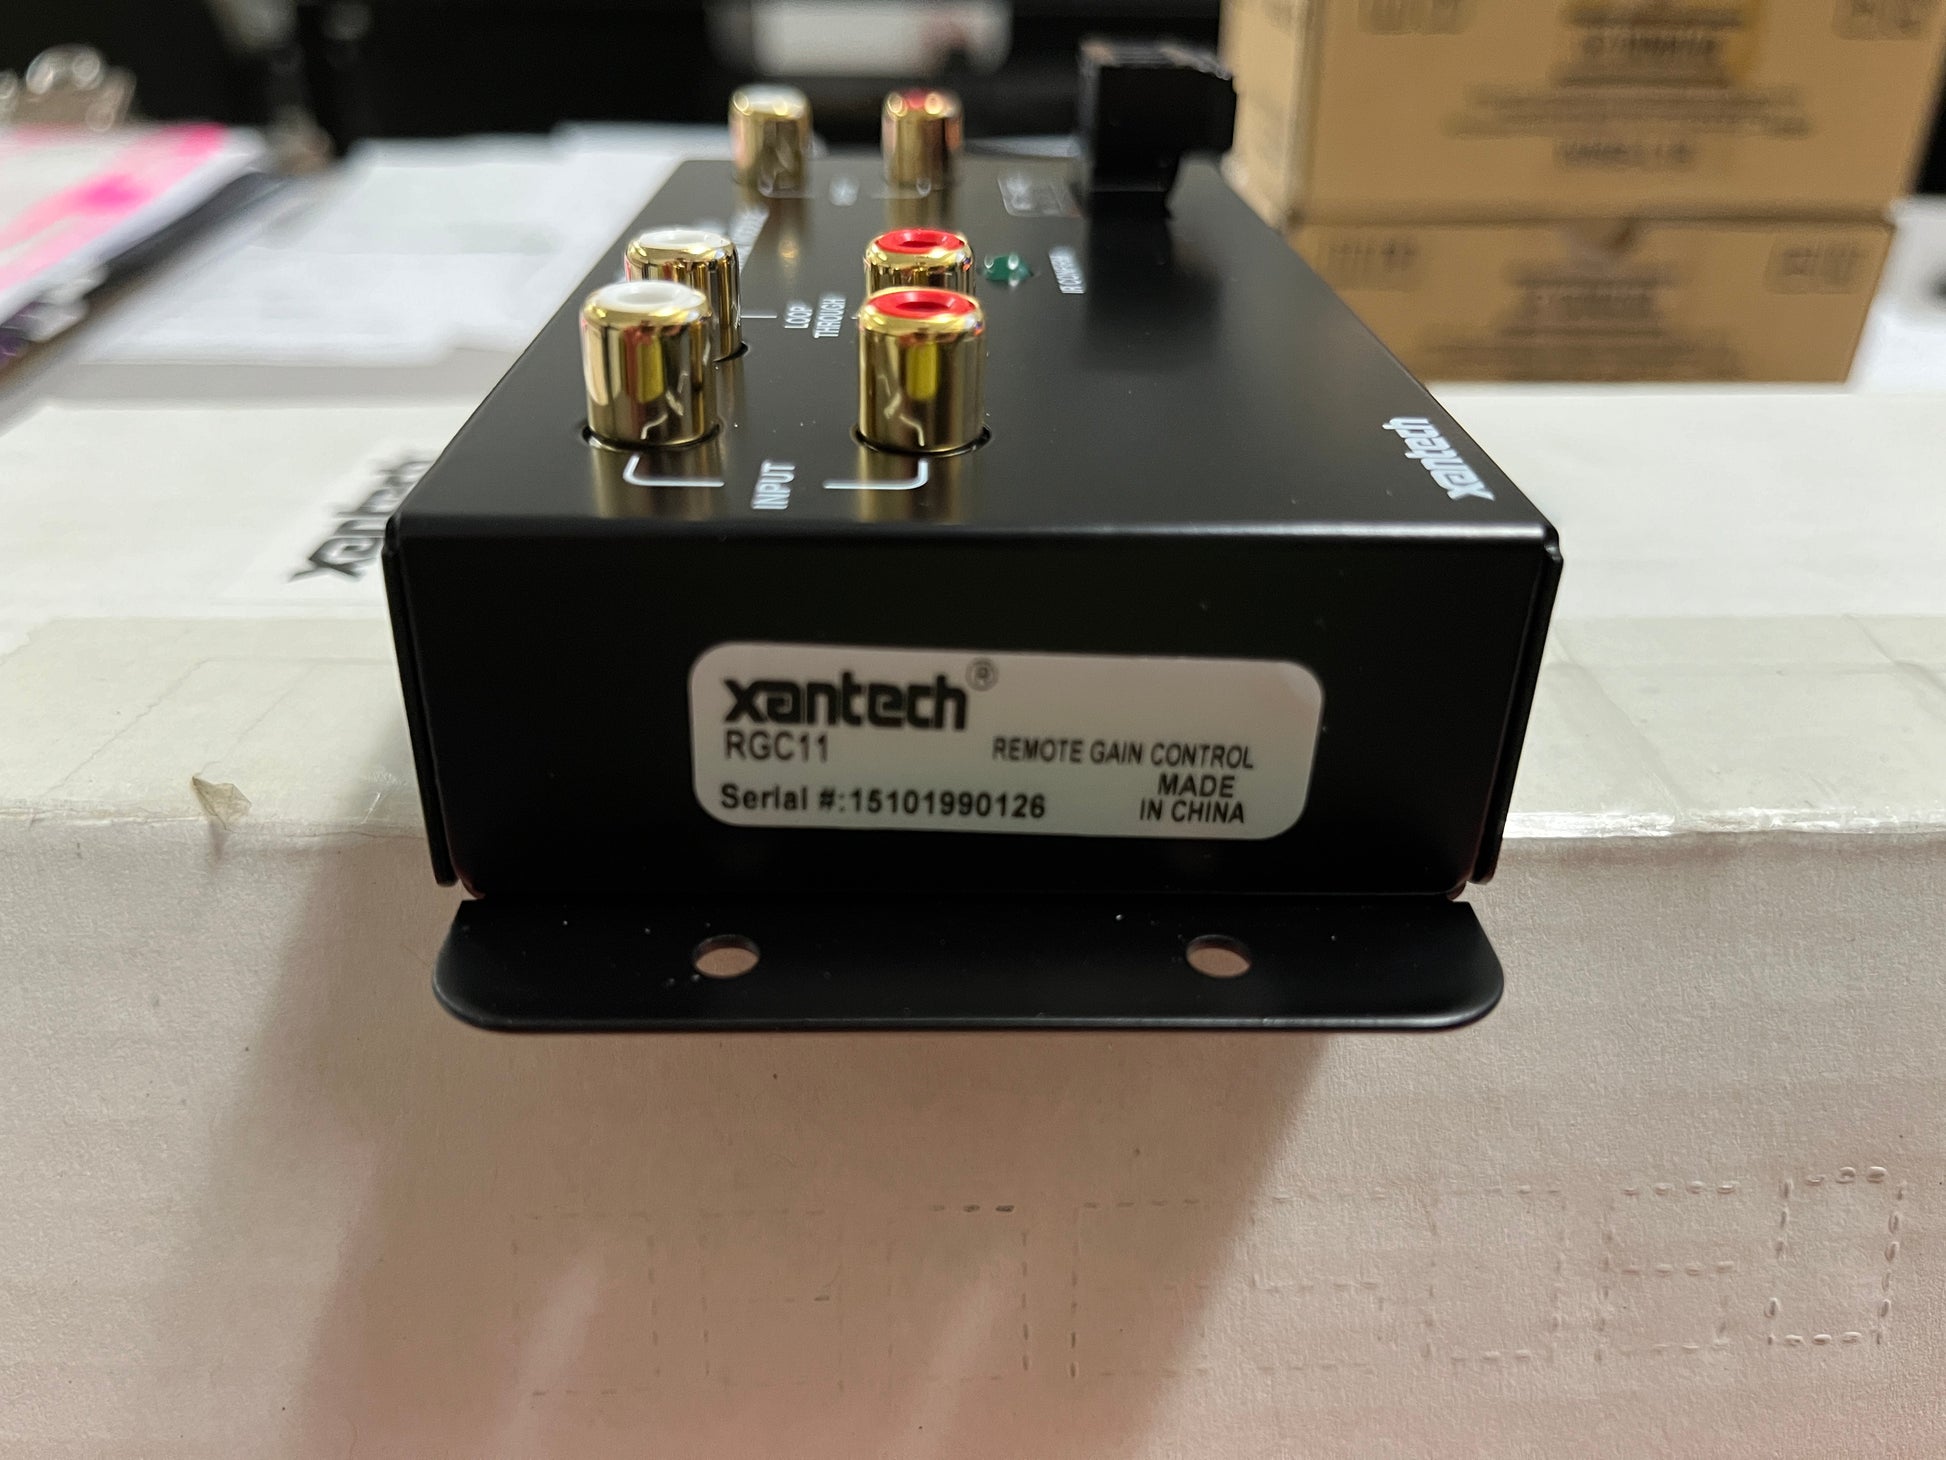 New Xantech RGC11 Remote Gain Control Module for Sale. 					We Sell Professional Audio Equipment. Audio Systems, Amplifiers, Consoles, Mixers, Electronics, Entertainment, Sound, Live.